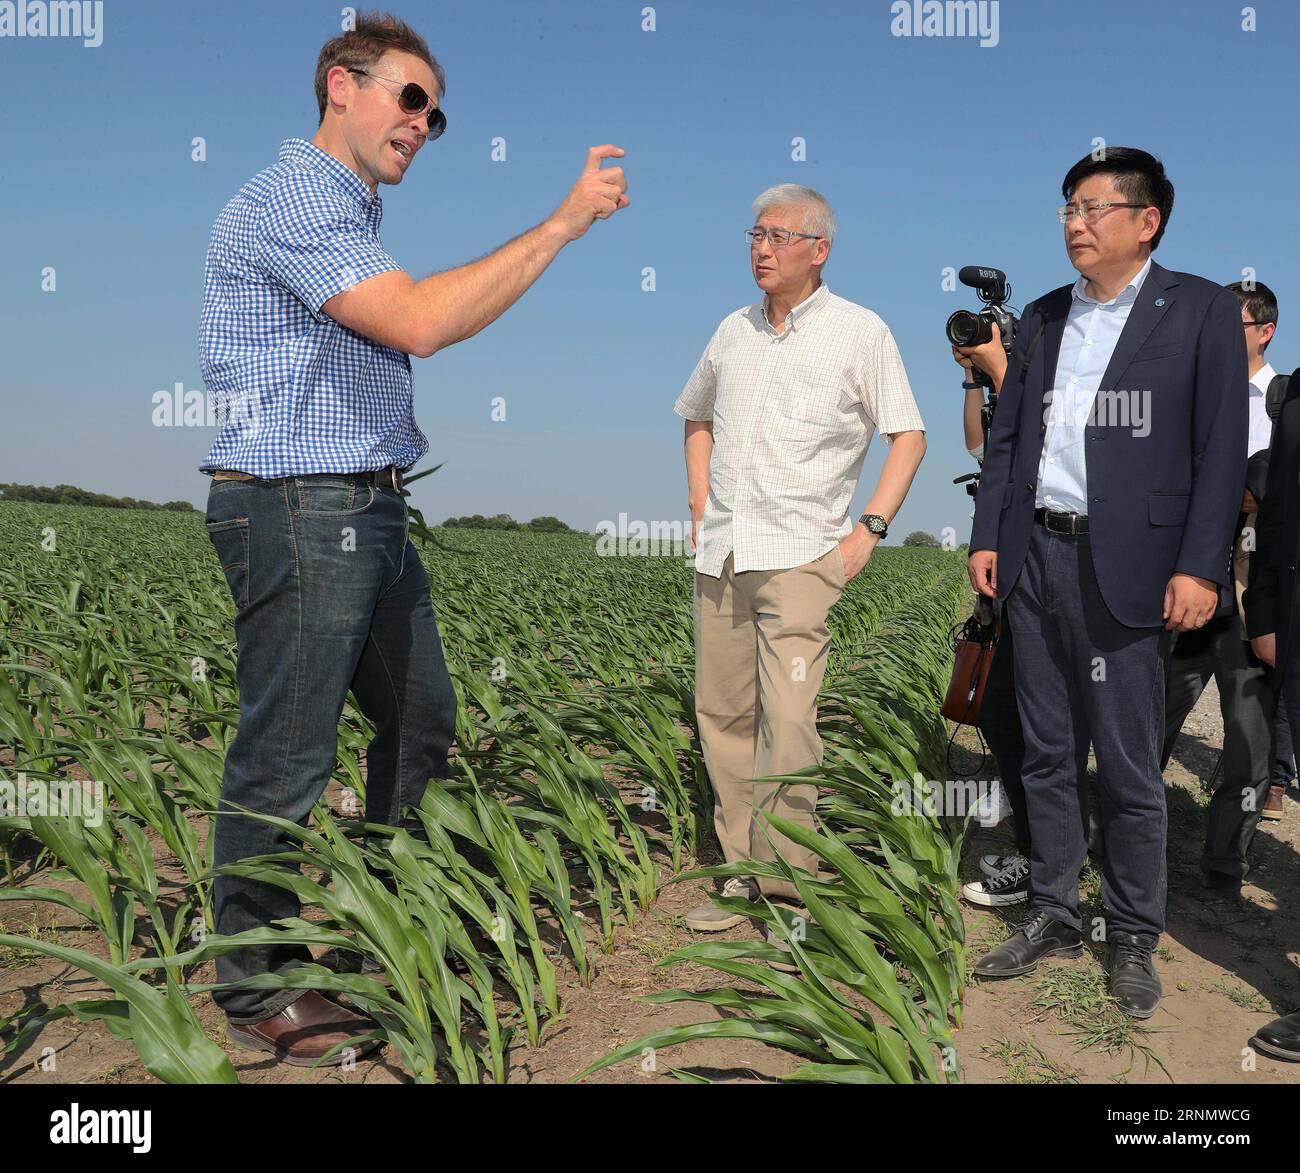 (170612) -- DES MOINES, June 12, 2017 -- Grant Kimberley (L), son of Kimberley Farm owner, introduces crop planting and agricultural techniques used by his farm in Des Moines, Iowa, the United States, June 11, 2017. )(gl) FEATURE-US-IOWA-FARM WangxPing PUBLICATIONxNOTxINxCHN   the Moines June 12 2017 Grant Kimberley l Sun of Kimberley Farm Owner introduces Crop Planting and Agricultural Techniques Used by His Farm in the Moines Iowa The United States June 11 2017 GL Feature U.S. Iowa Farm WangxPing PUBLICATIONxNOTxINxCHN Stock Photo